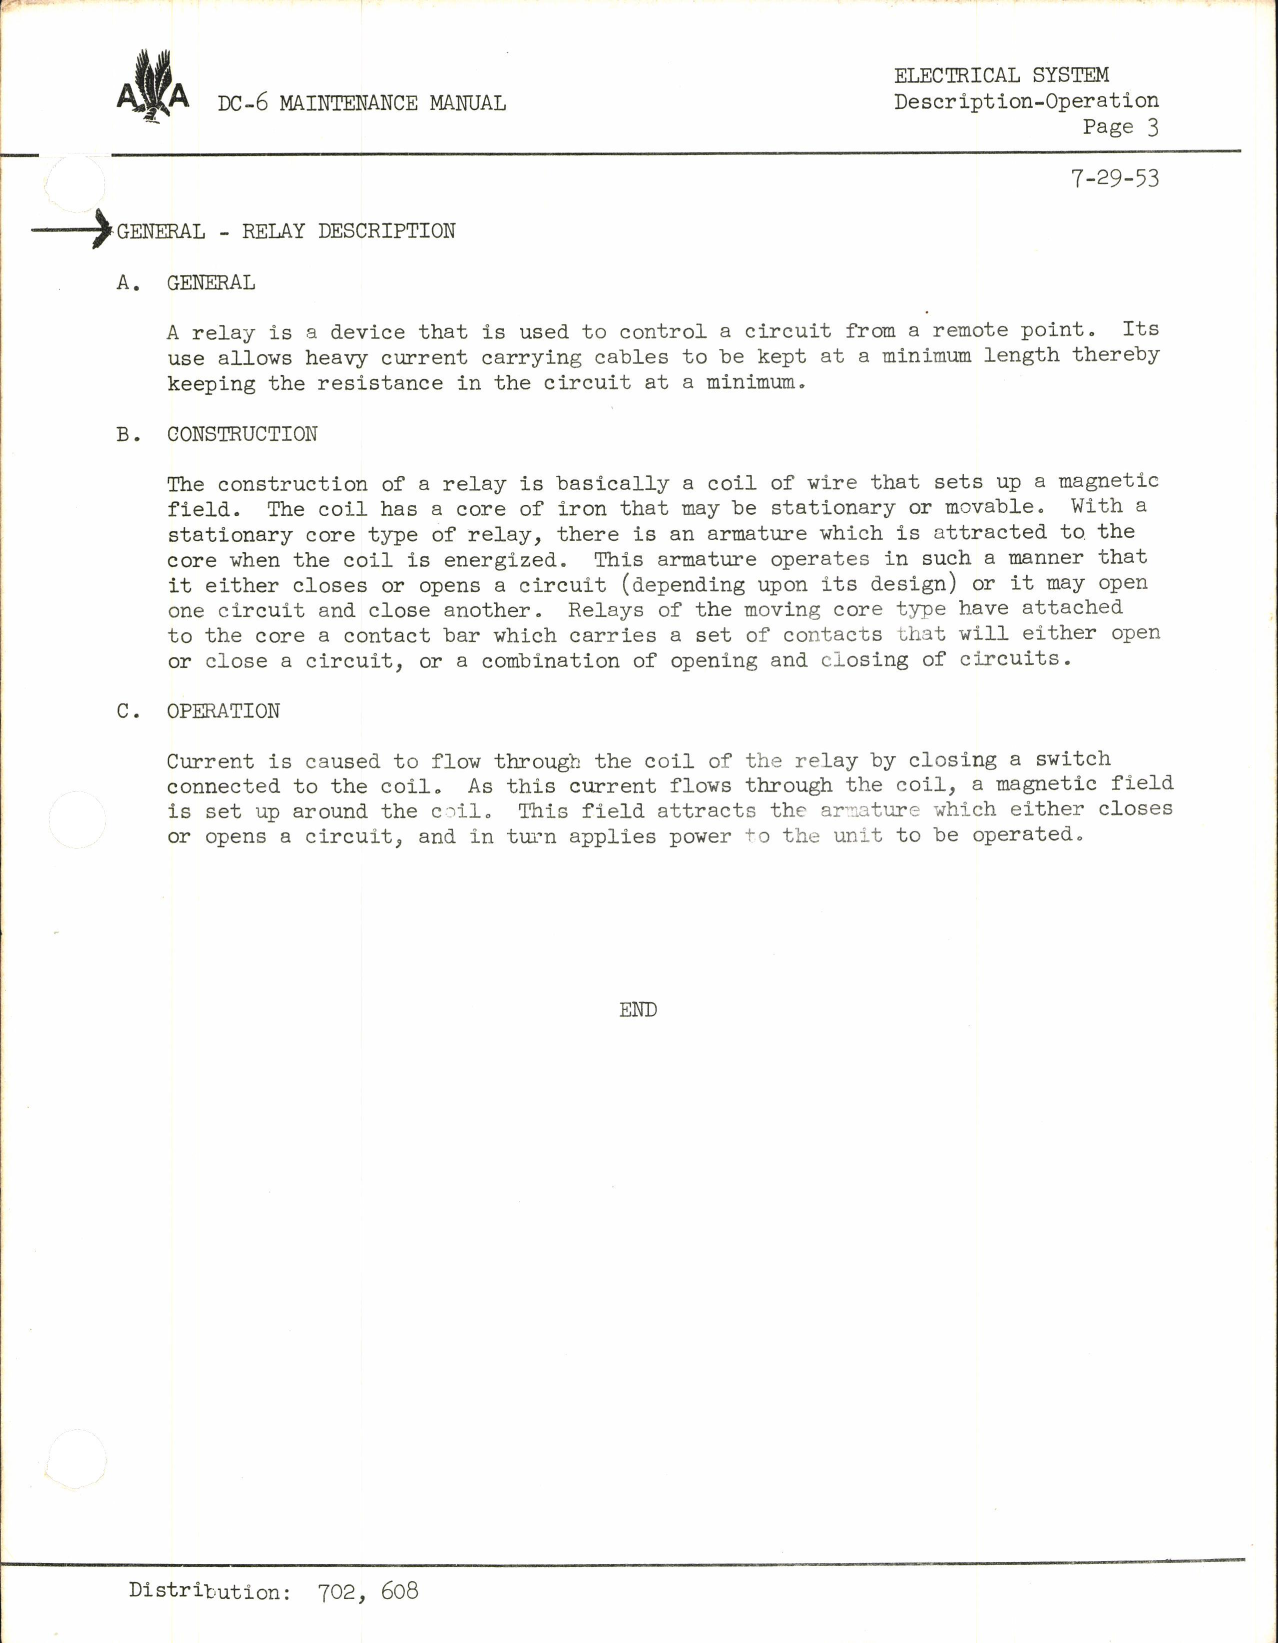 Sample page 7 from AirCorps Library document: DC-6 Maintenance Manual